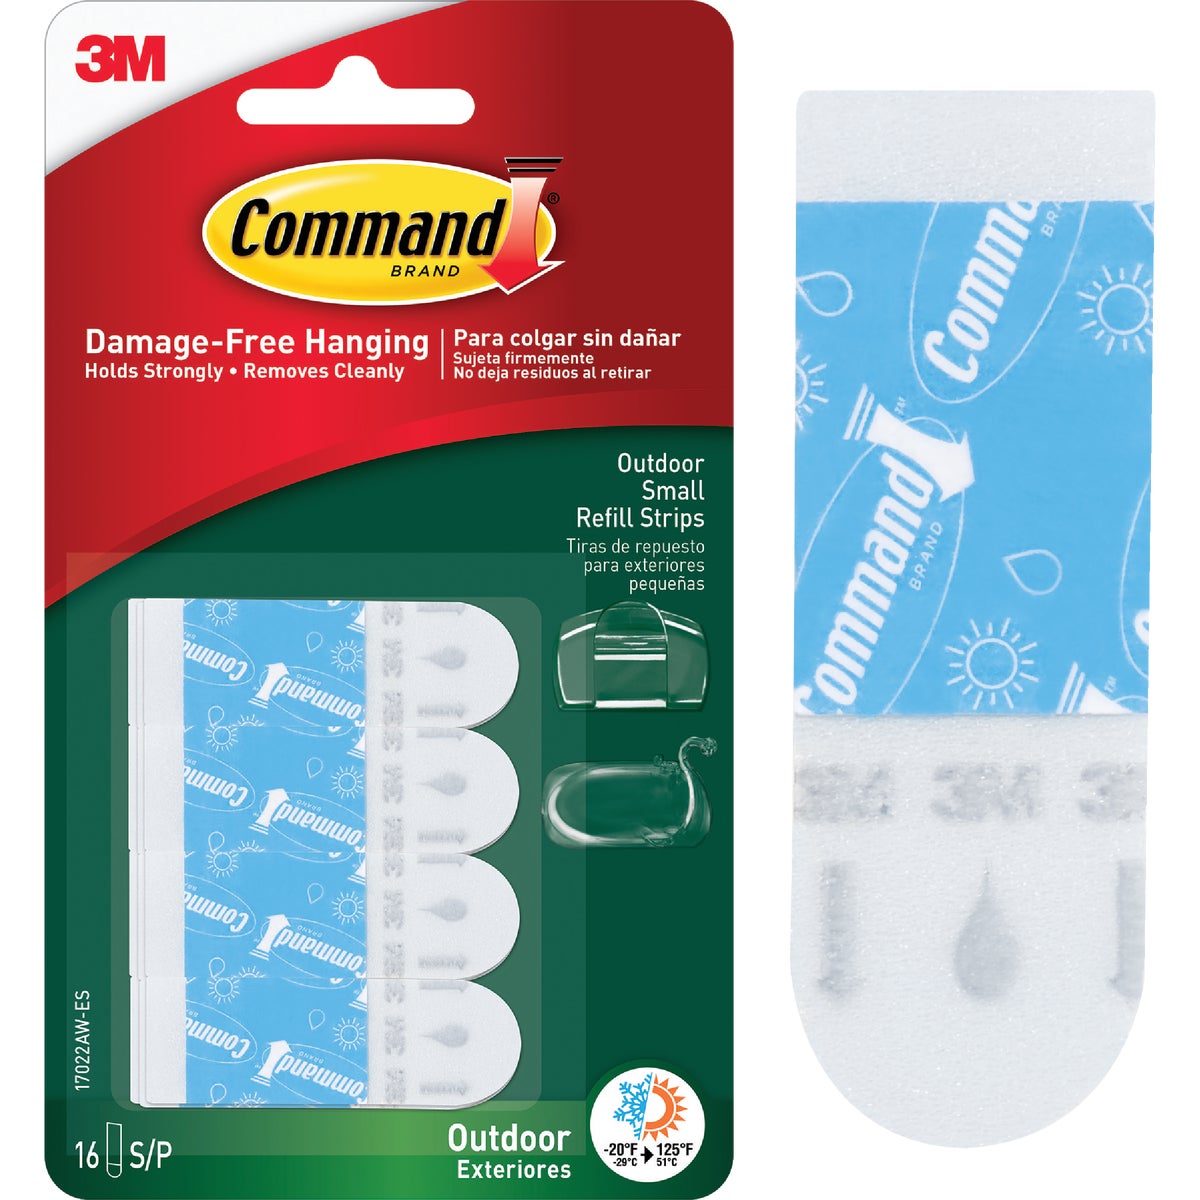 Item 200338, Command Outdoor Refill Strips make it easy to reuse your Command Outdoor 